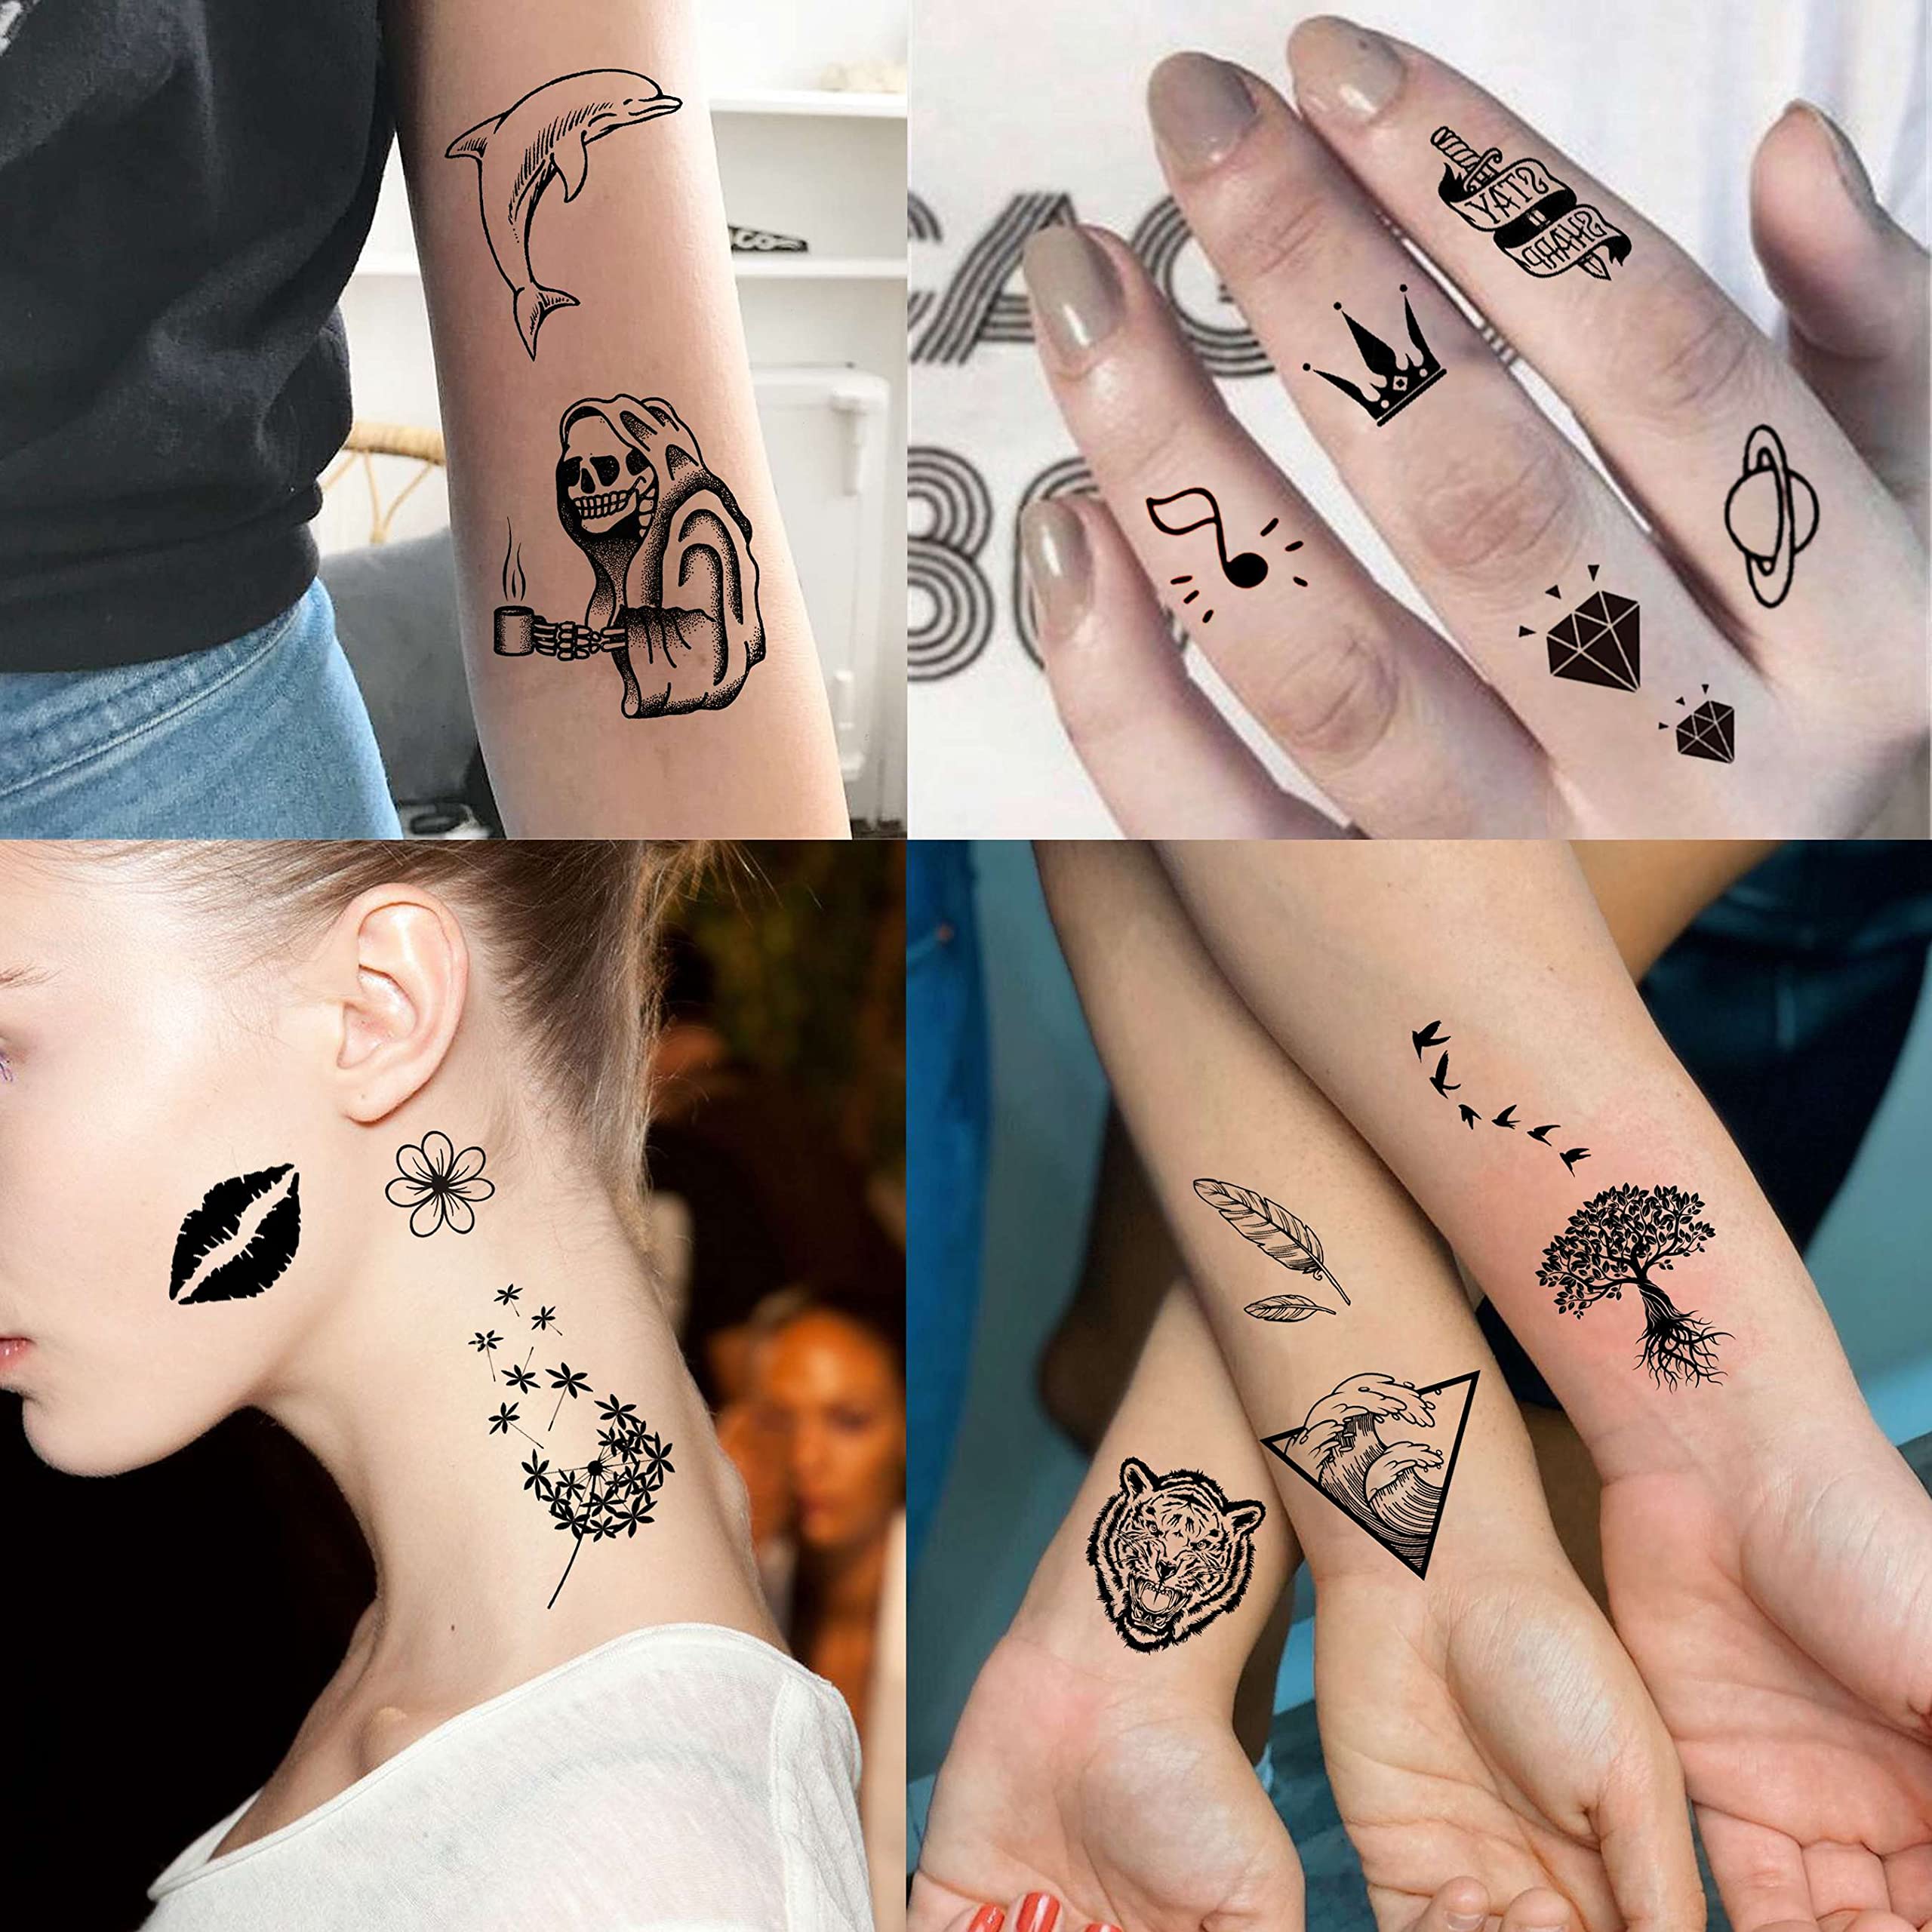 EGMBGM 52 Sheets Tiny Small Temporary Tattoos For Kids Boys Girls, Tribal Animals Butterfly Anchor Compass Tattoo Stickers For Men Women, 3D Cute Flower Fake Face Tatoo Kits Sets For Neck Arm Hands